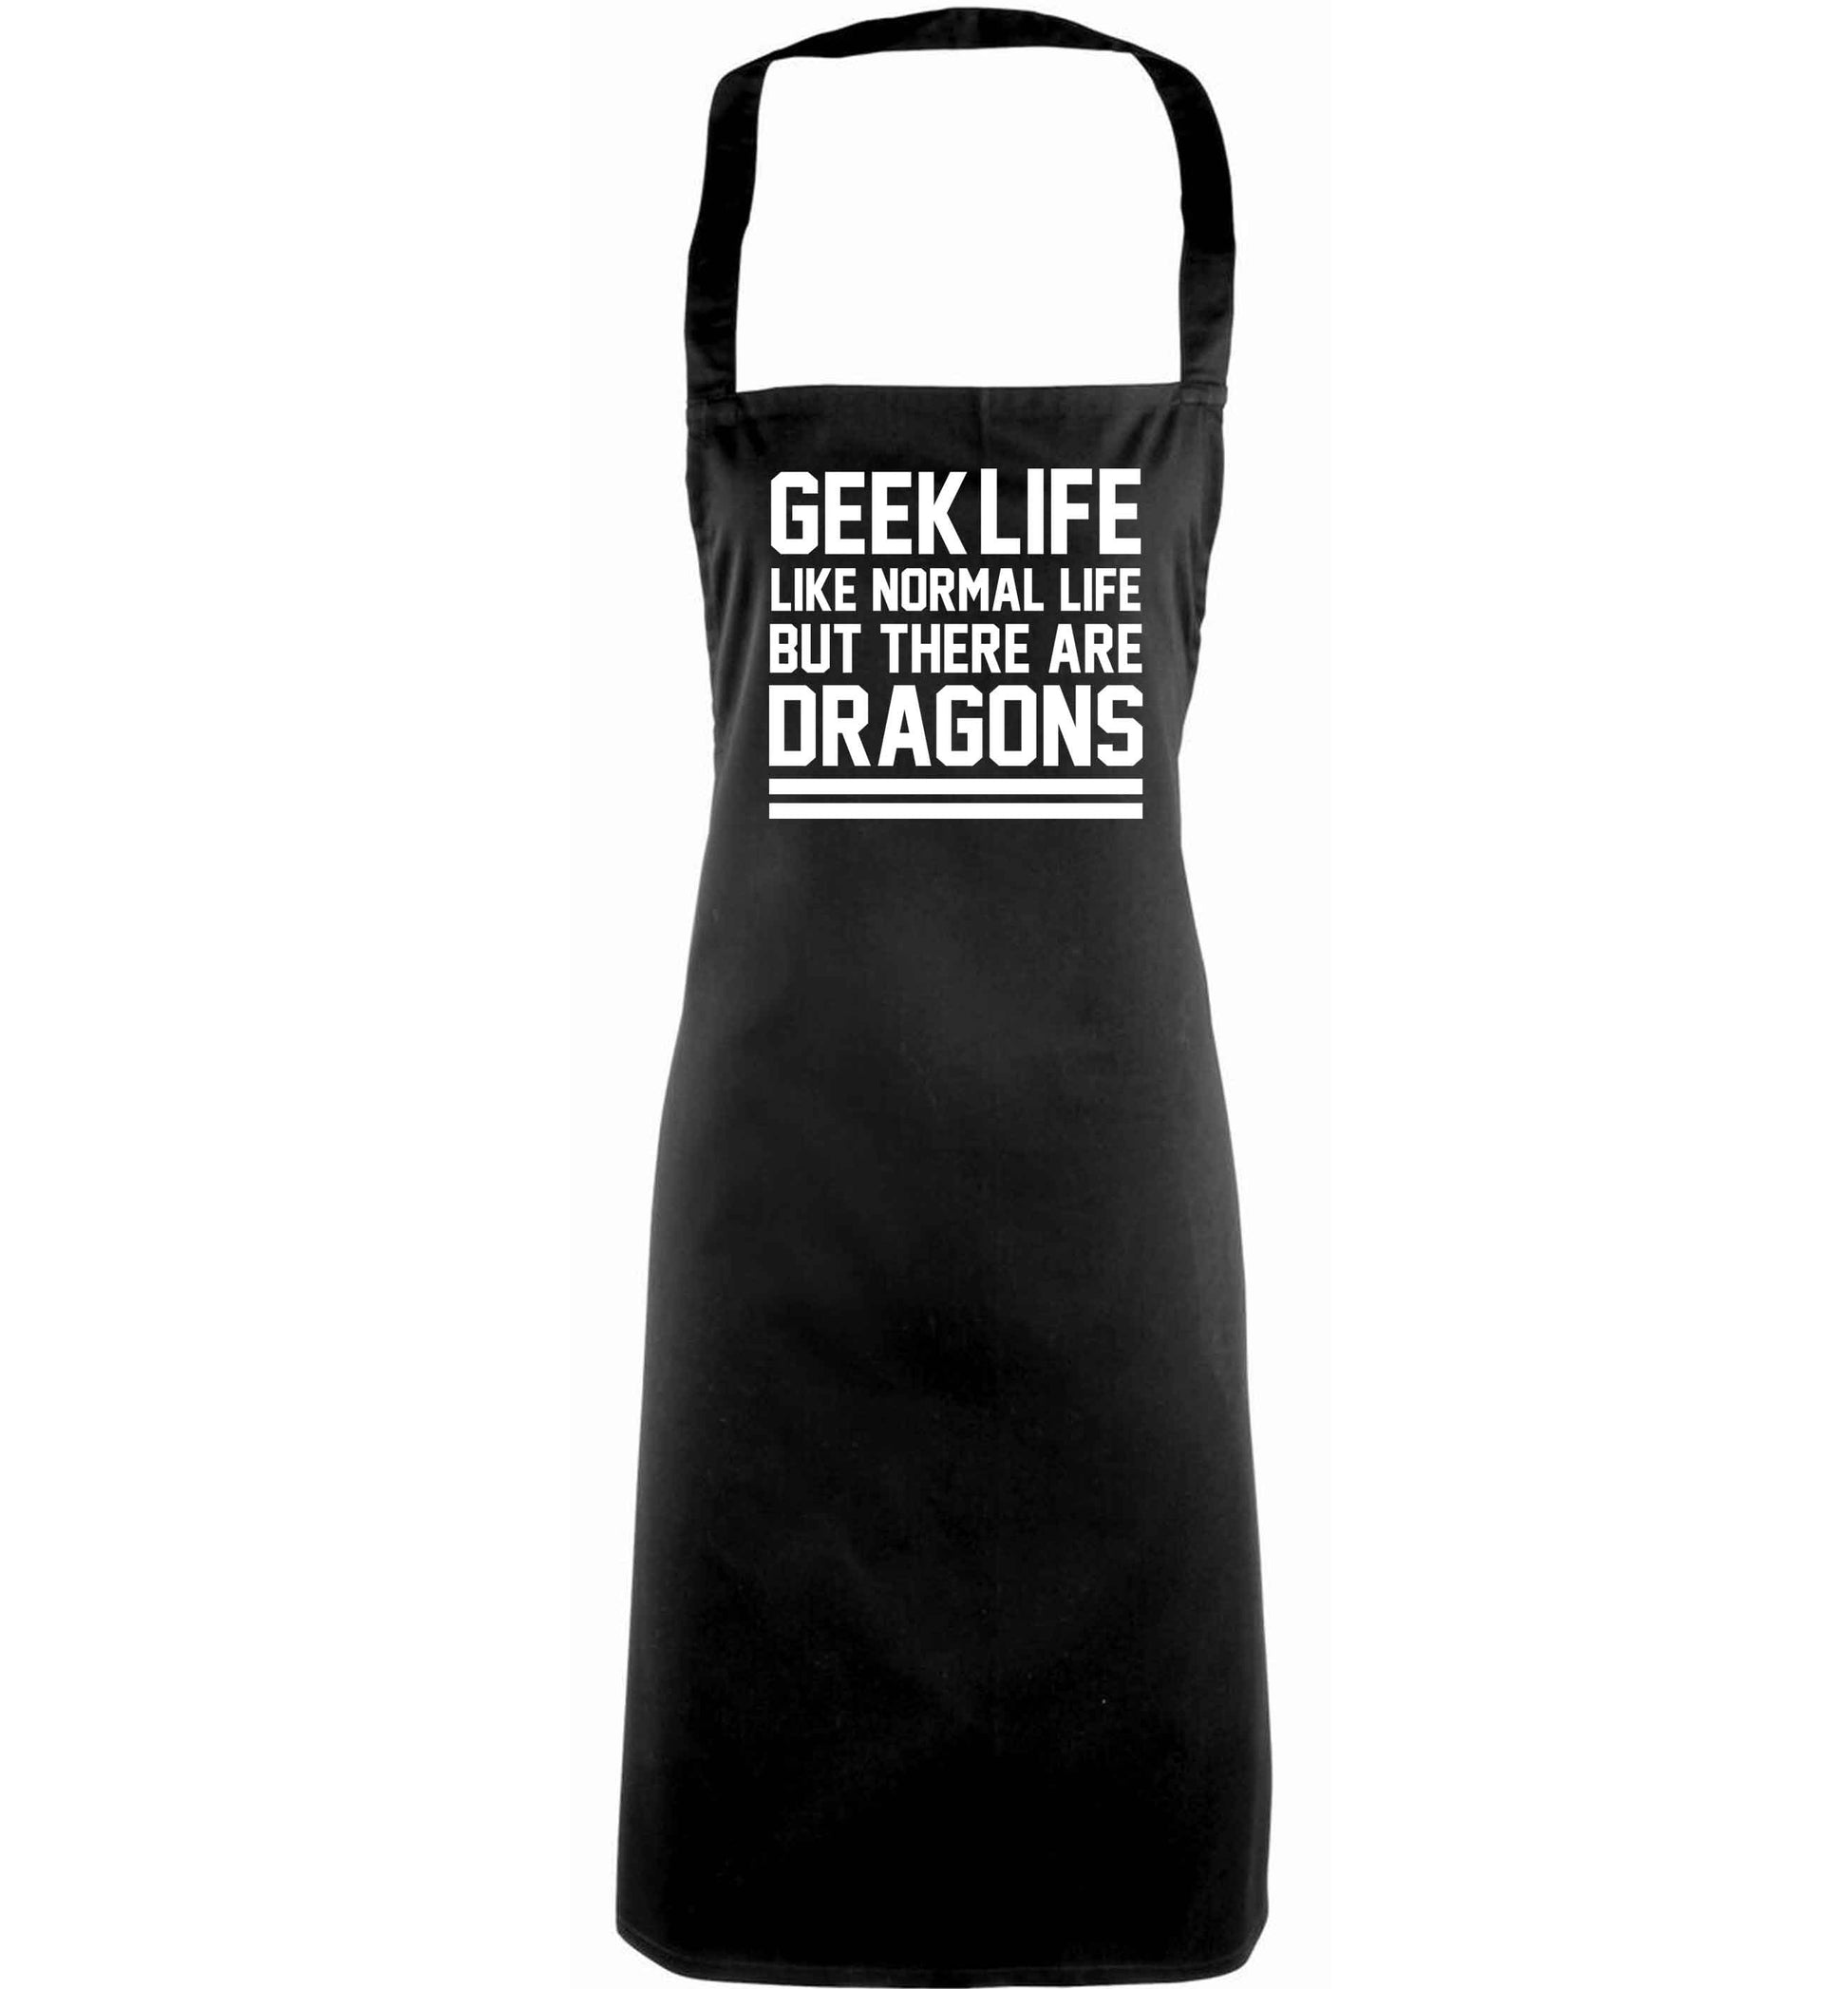 Geek life like normal life but there are dragons adults black apron